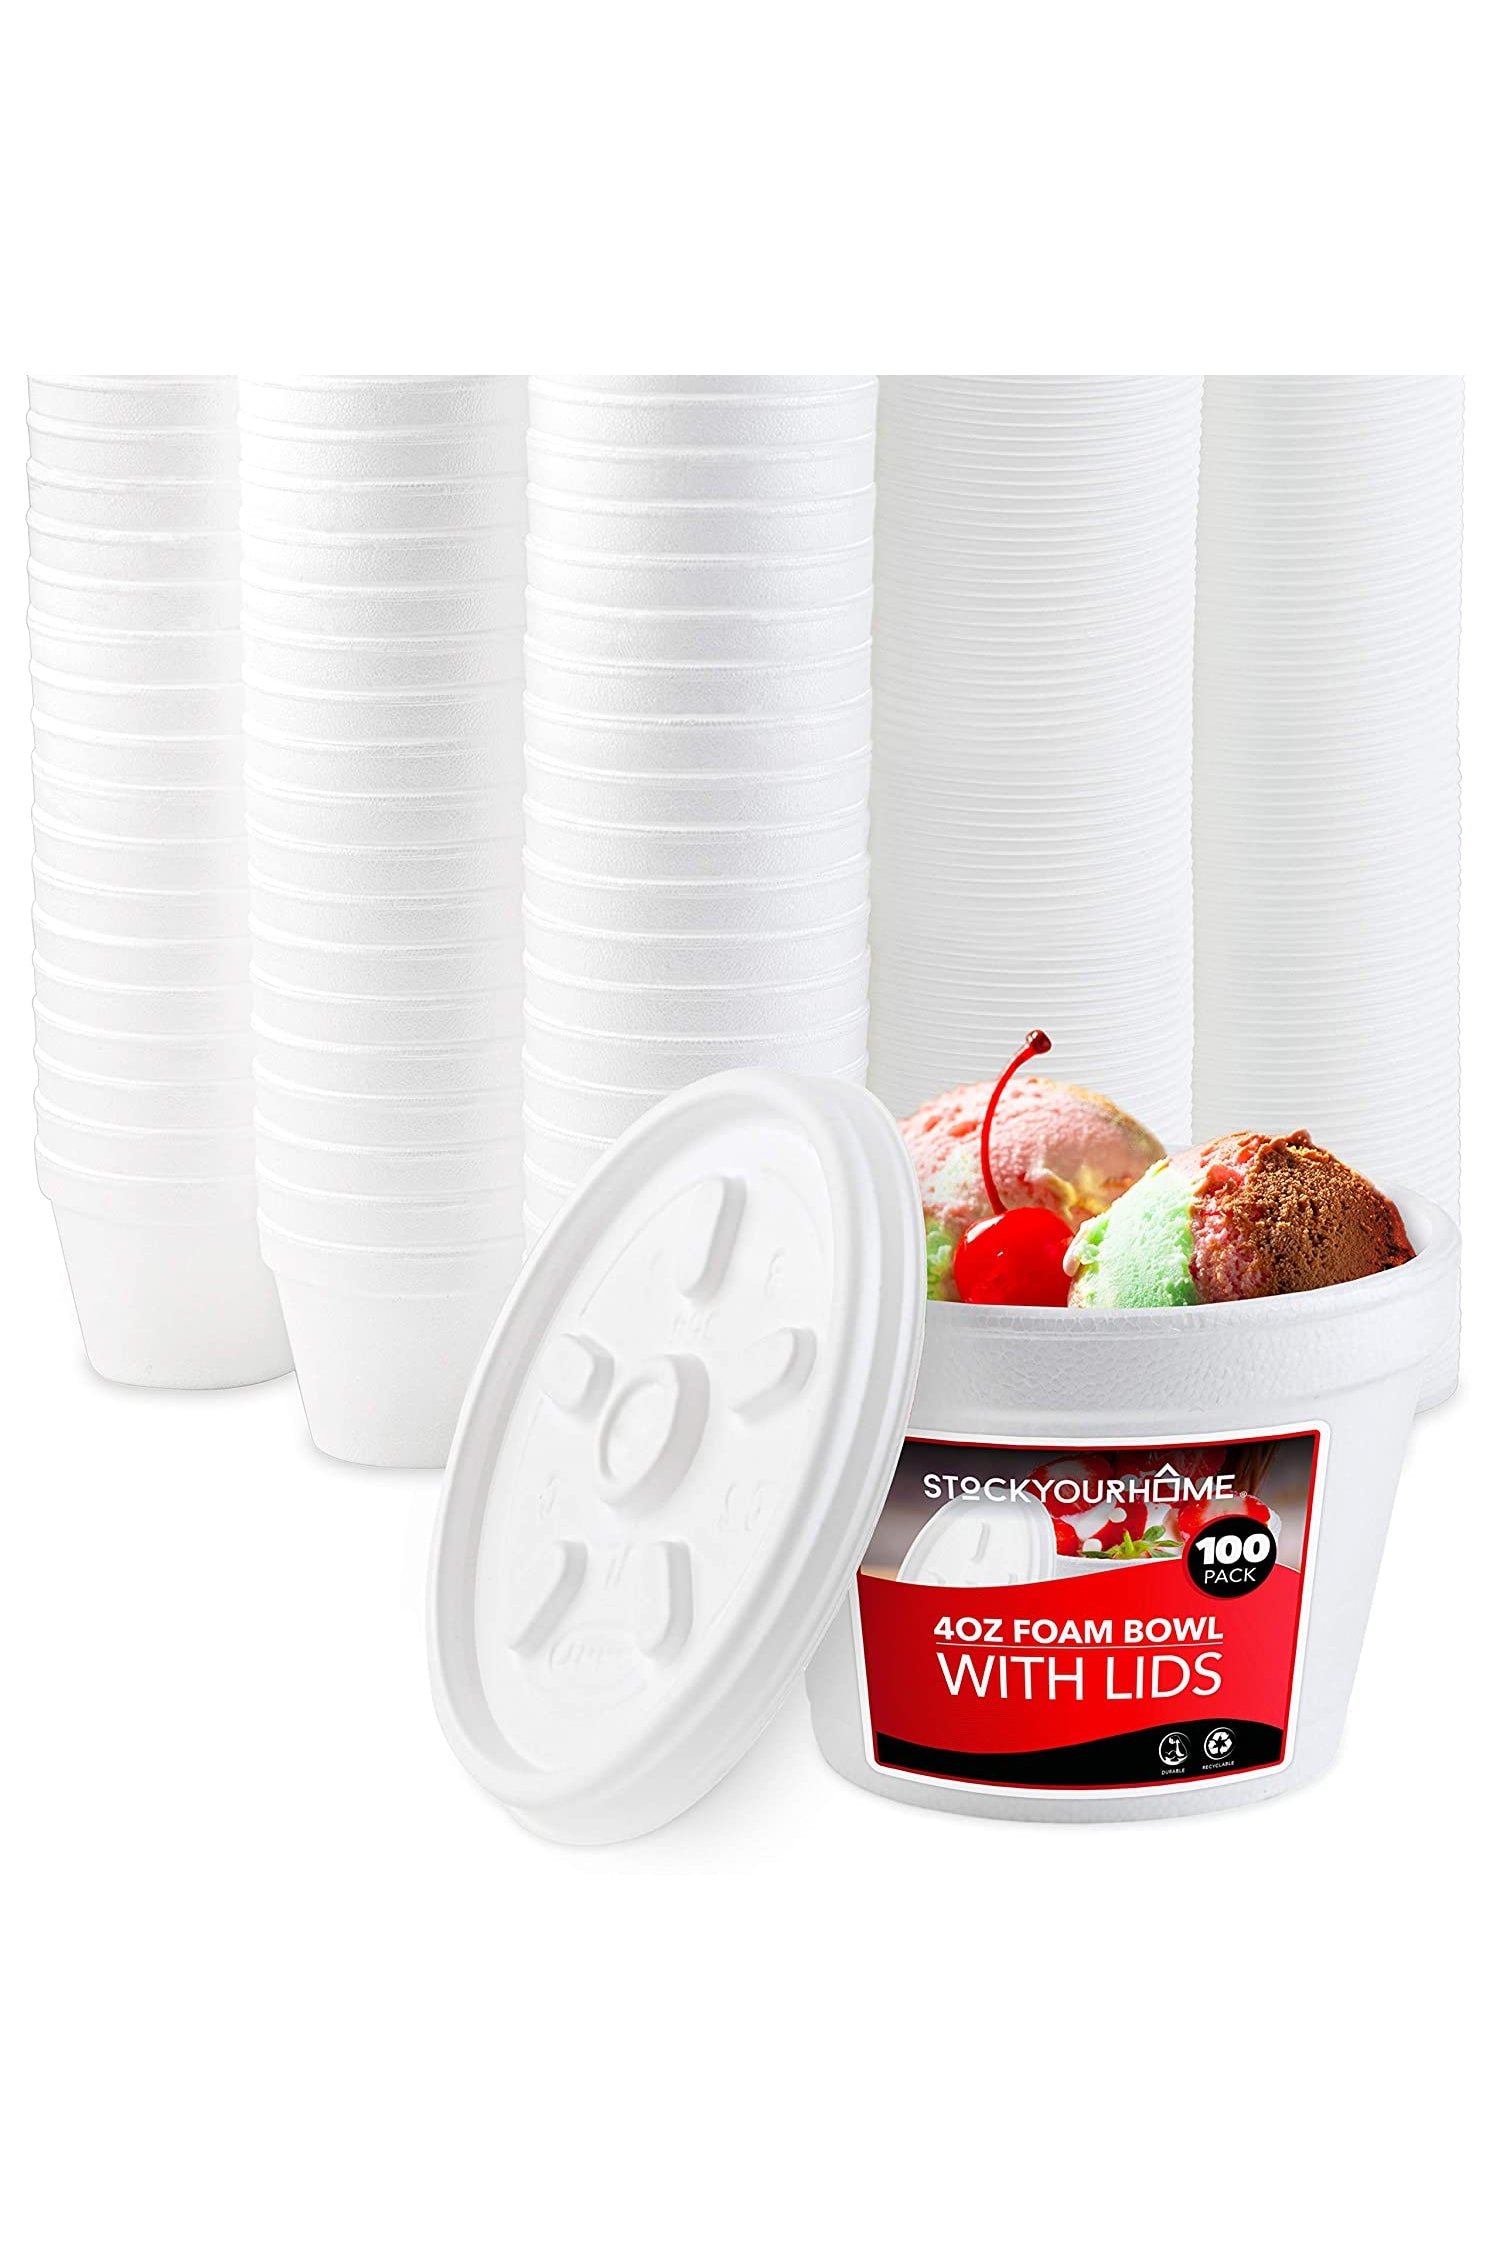 Stock Your Home 4 Ounce Foam Bowls with Lids (100 Count) - Styrofoam Bowls  with Lids - Insulated to Go Foam Cups - to Go Containers for Soup, Oatmeal